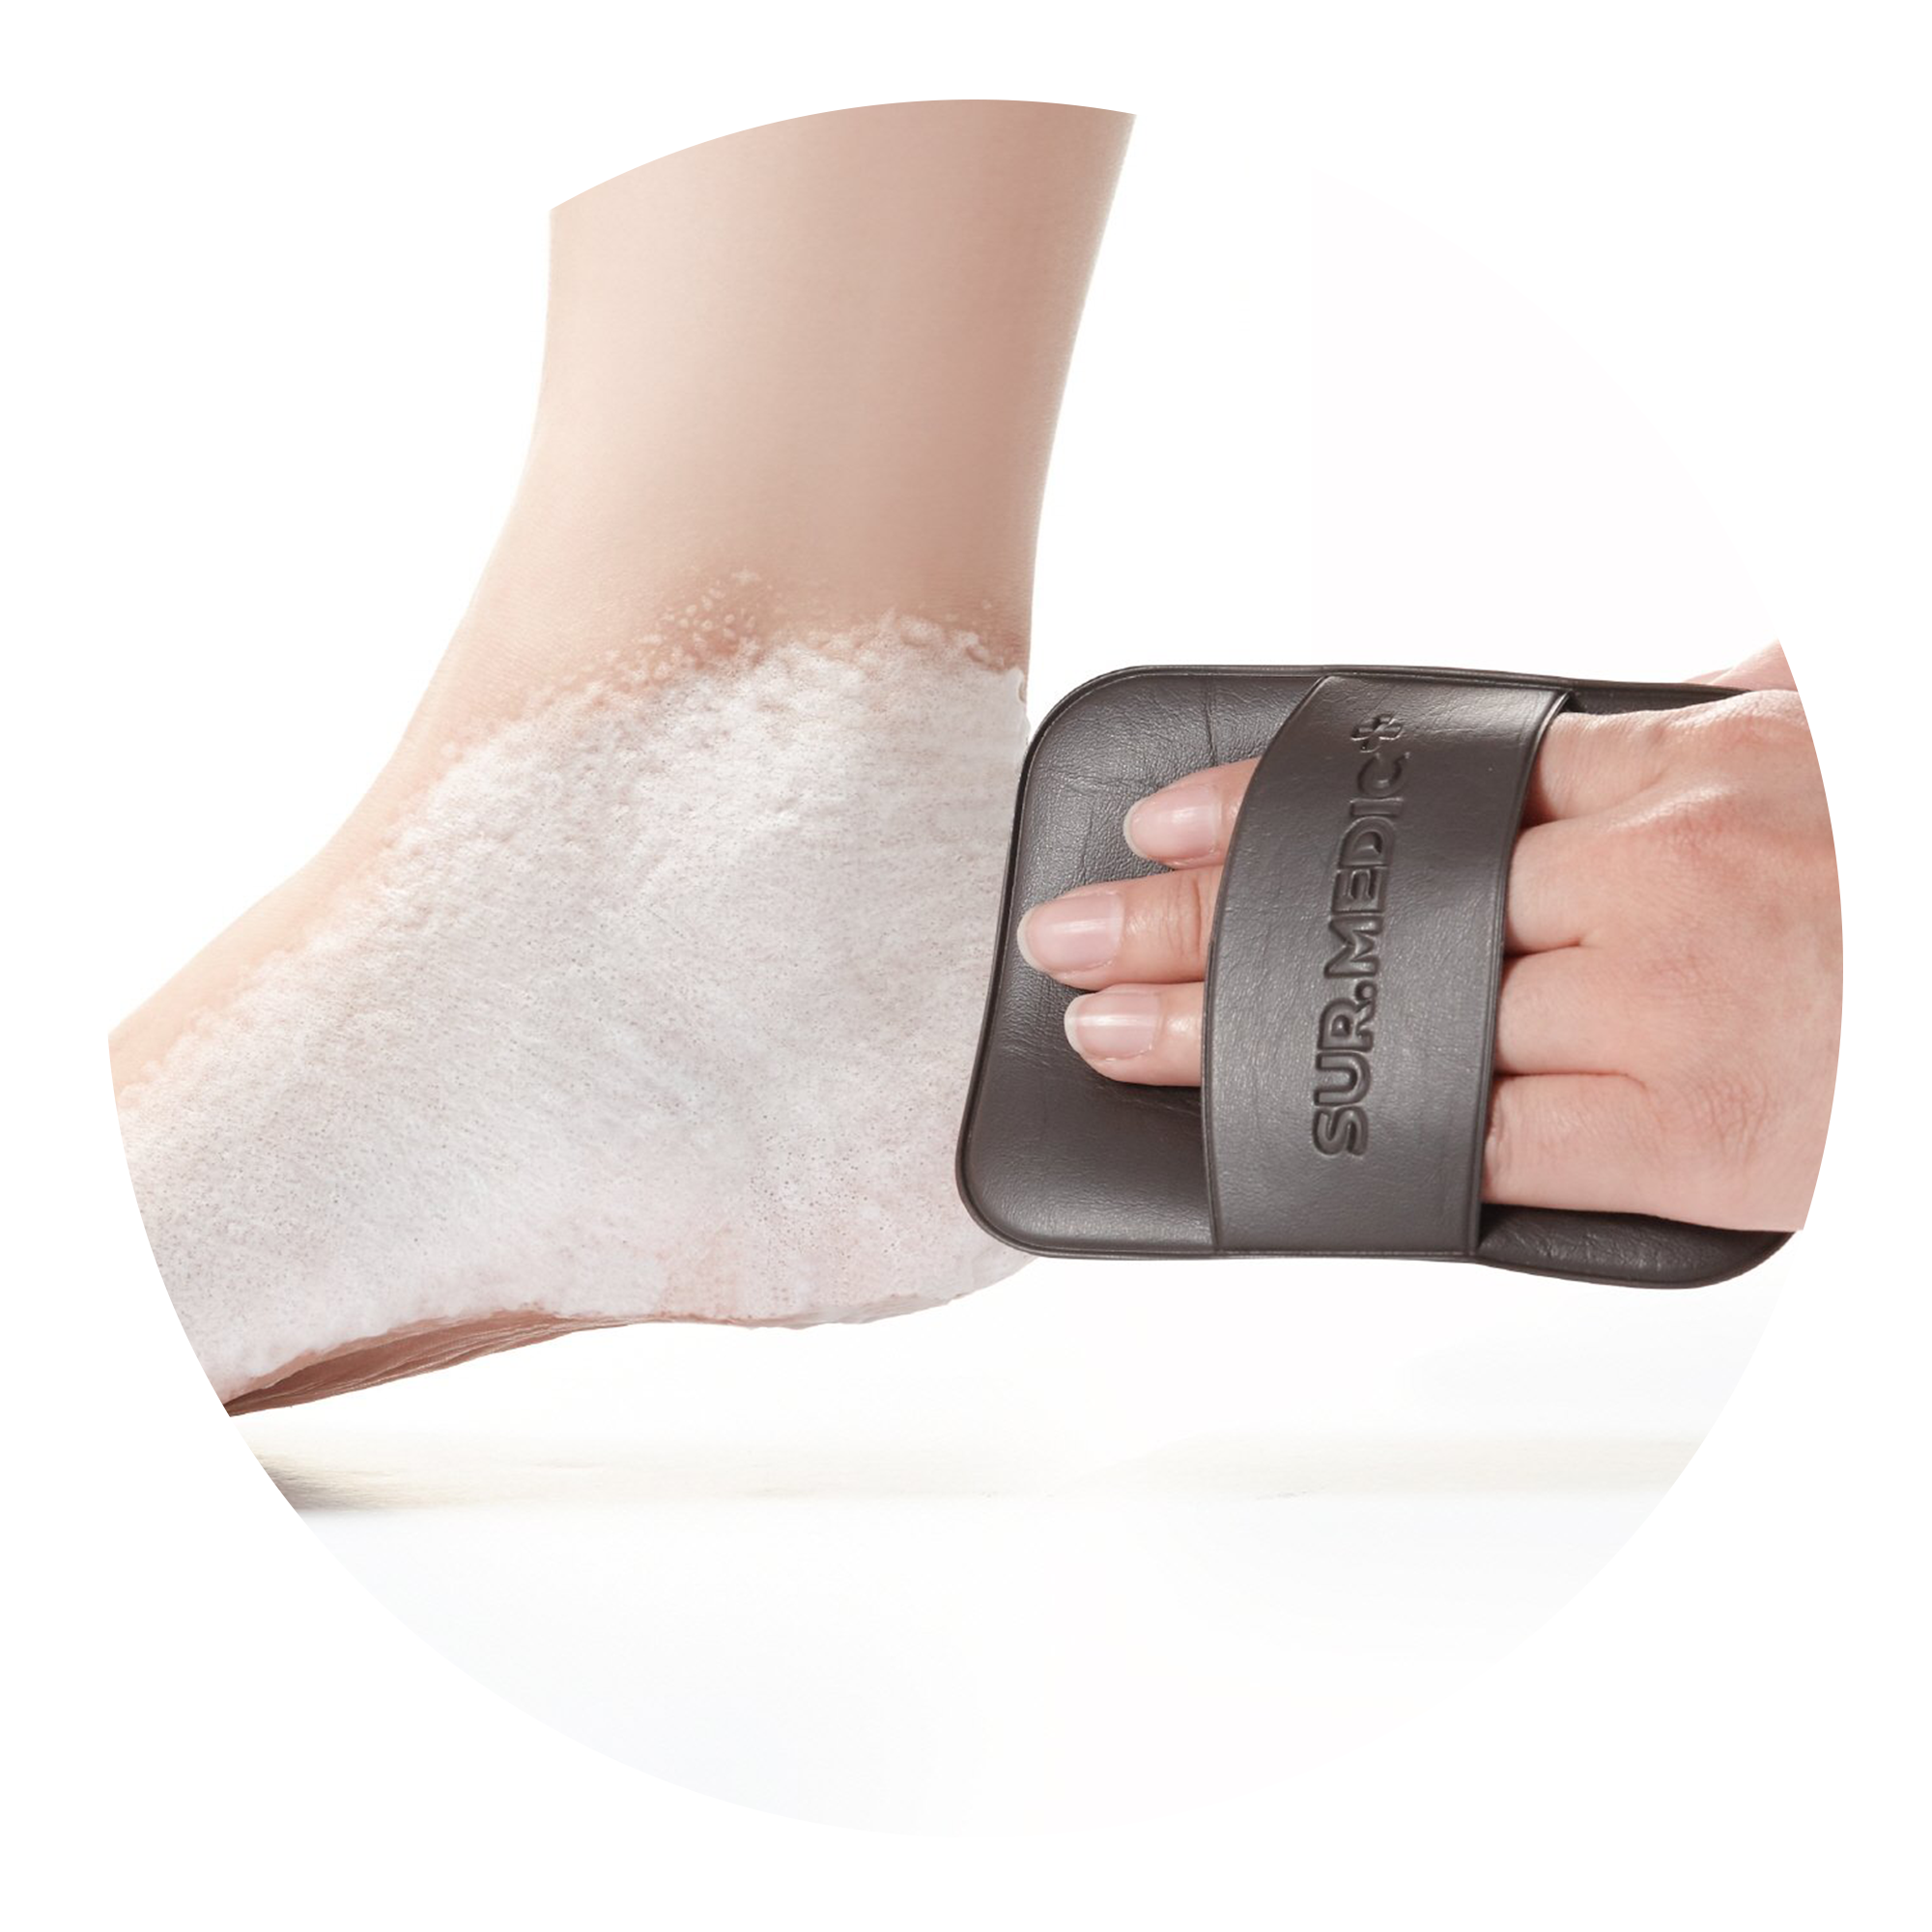 SUR.MEDIC Thermal Water Foot Spa Remover Pad Holder